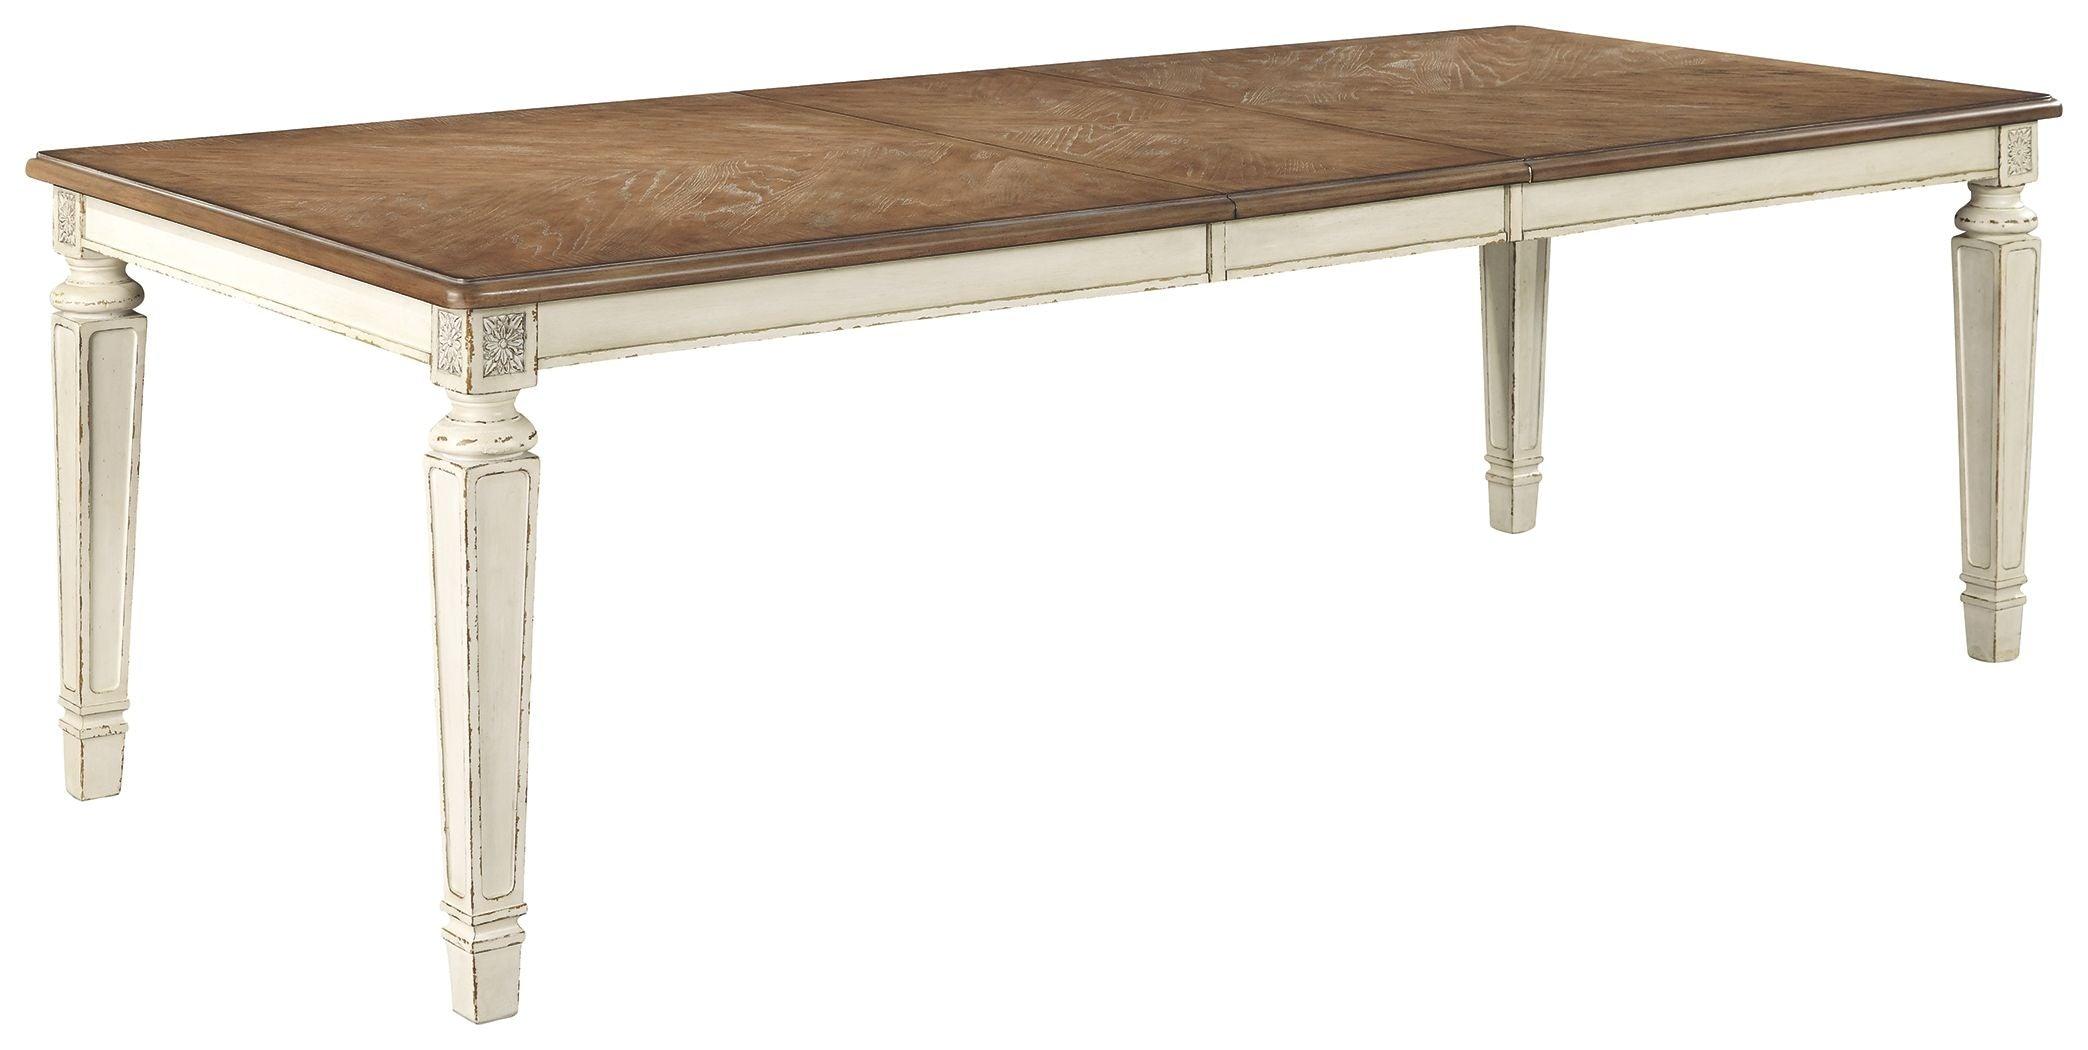 Ashley Furniture - Realyn - Chipped White - Rectangular Dining Room Extension Table - 5th Avenue Furniture